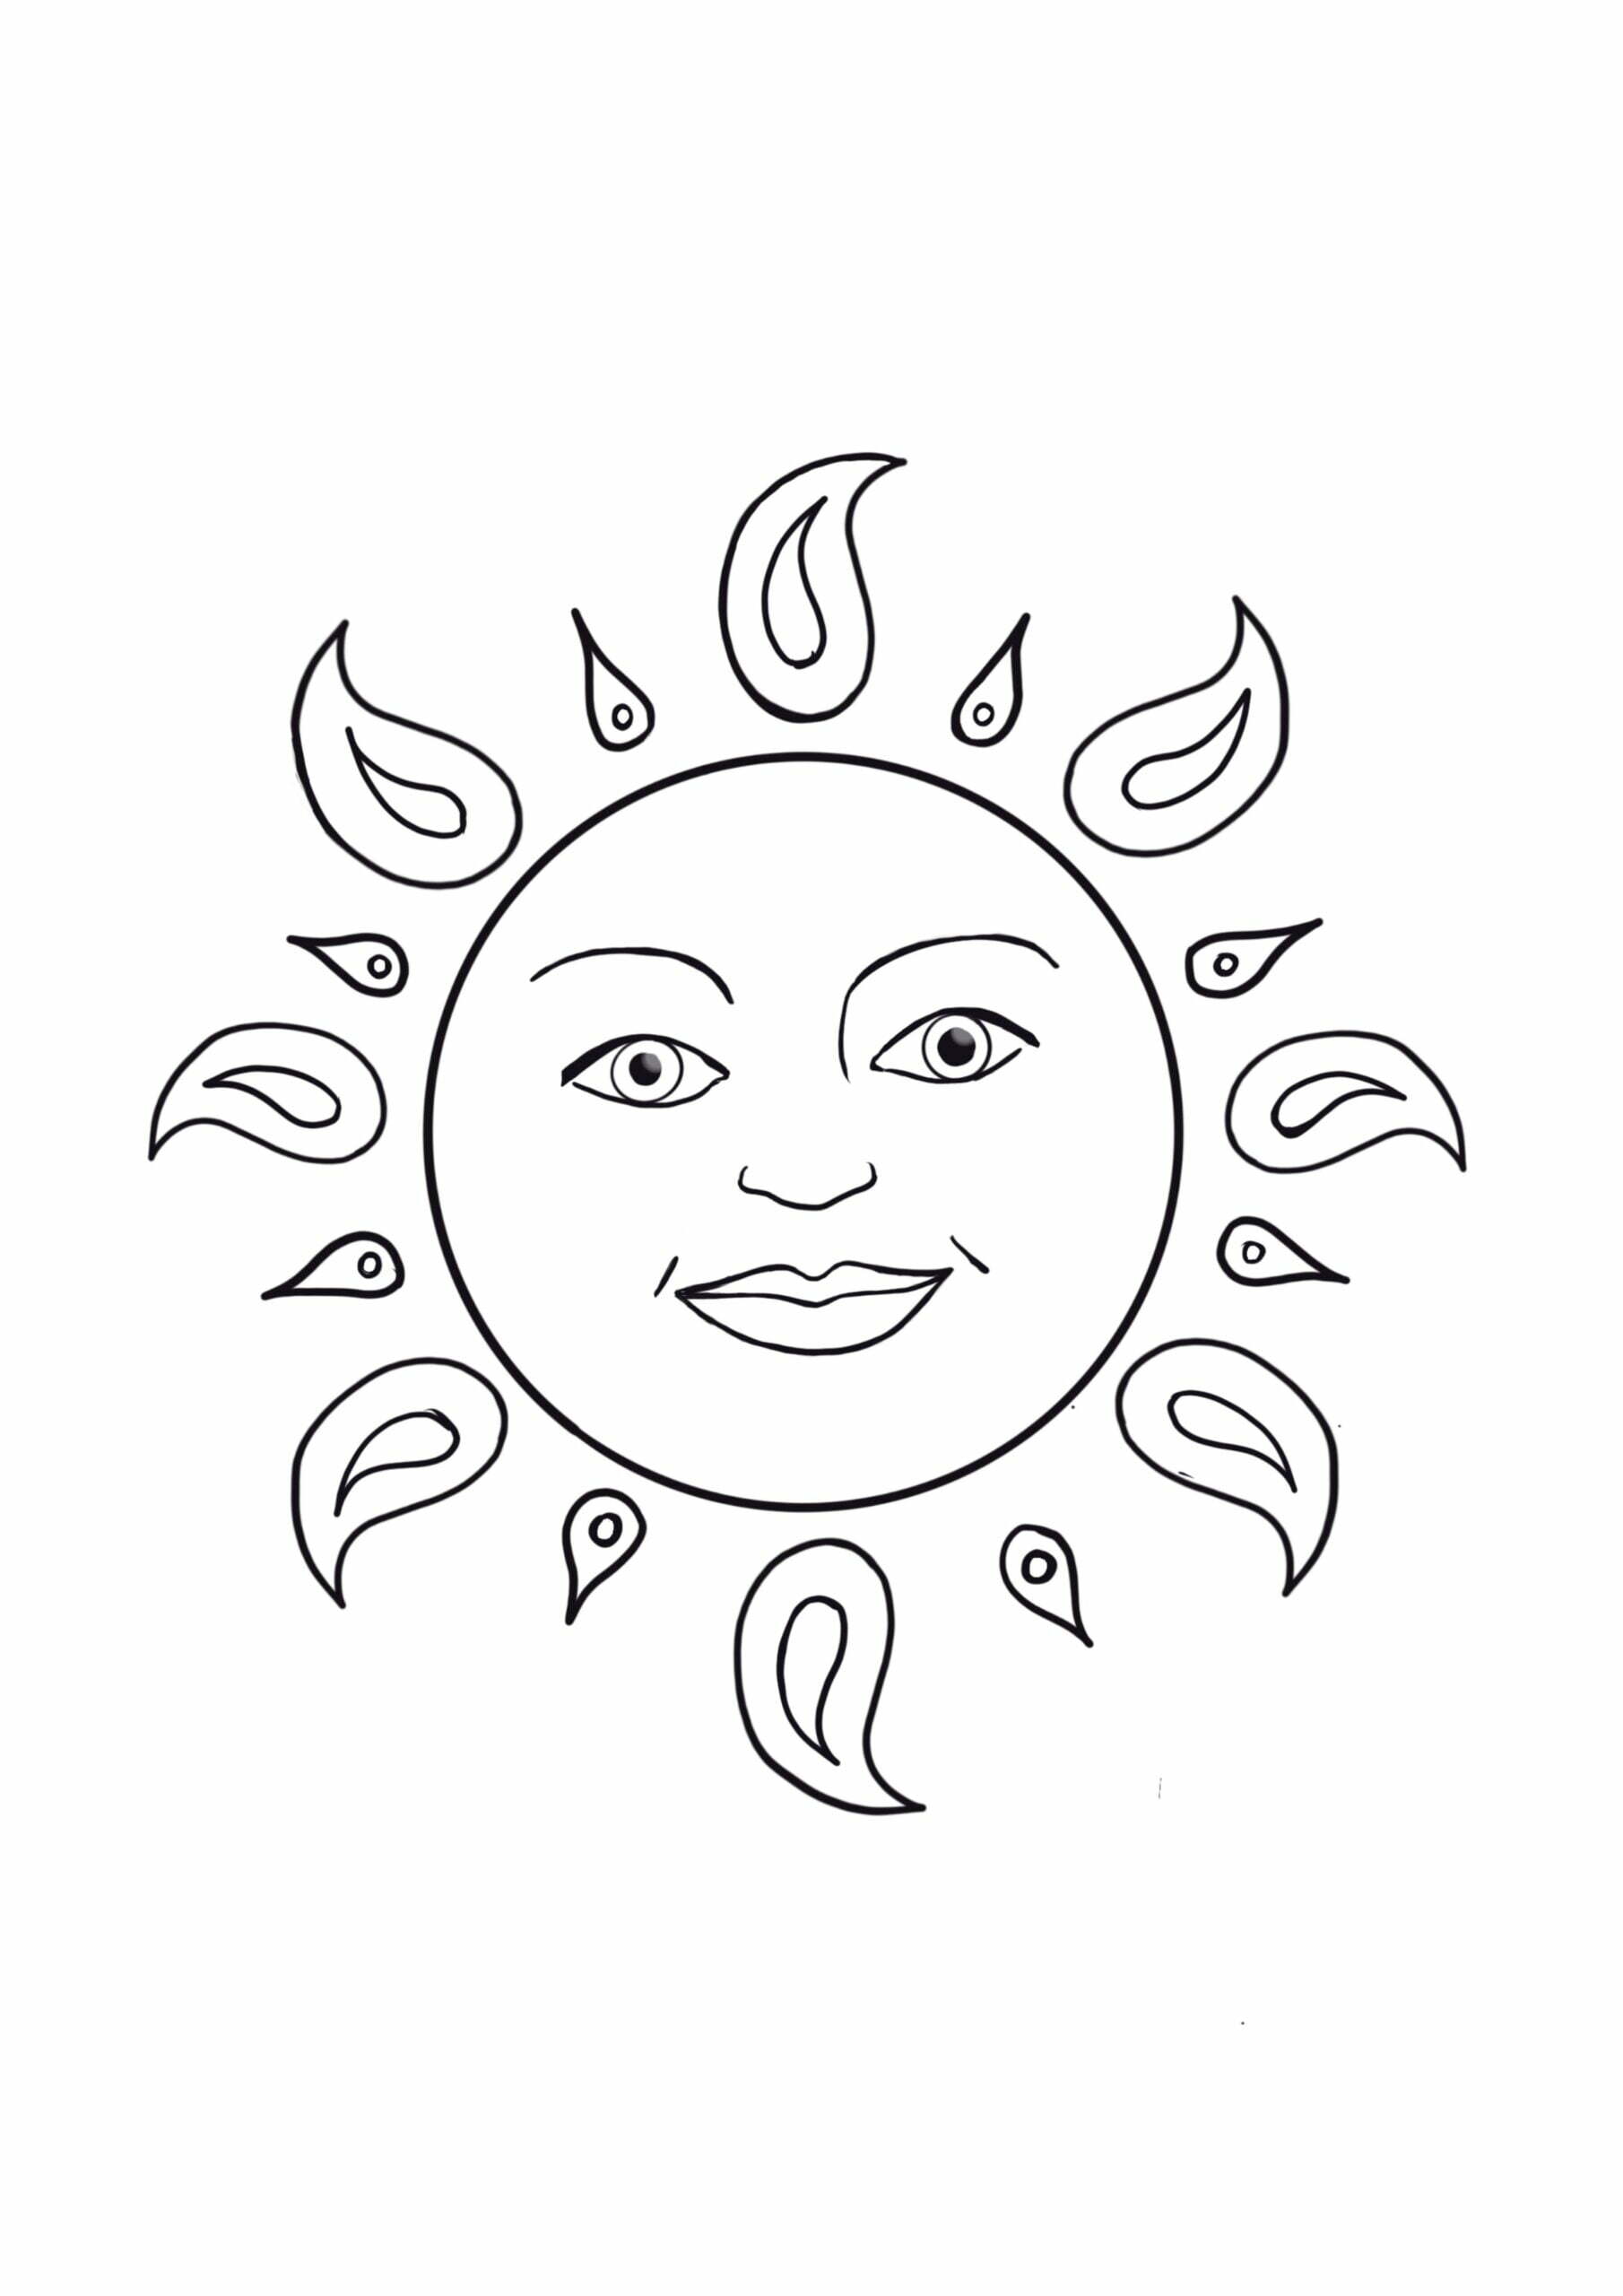 Looking for a Sun Template? 8 FREE Printable Suns to Warm Your Creative